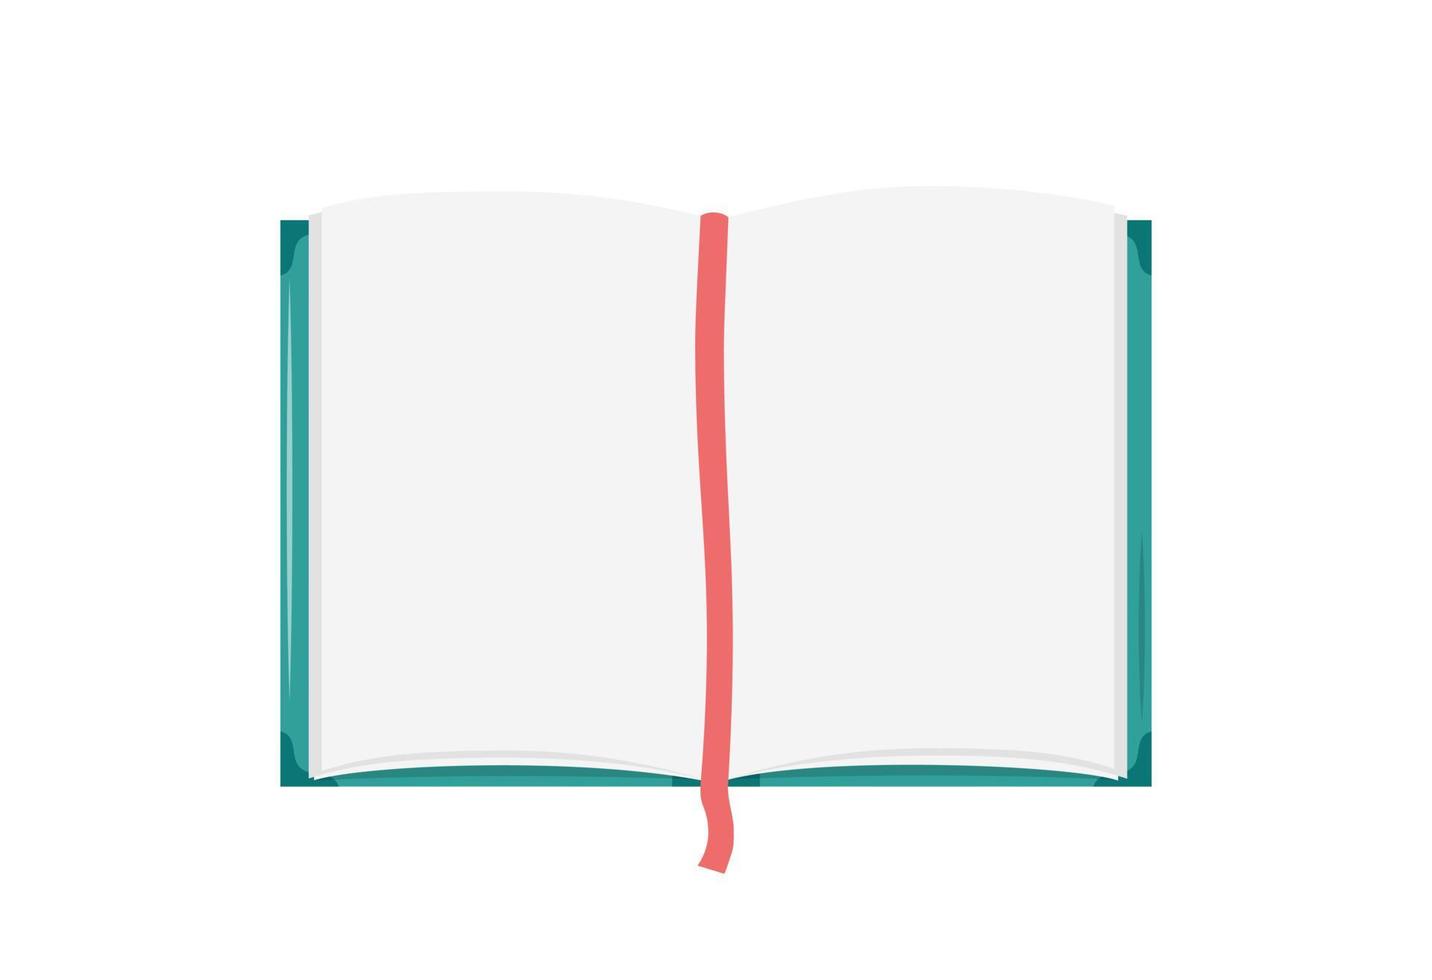 Blank open book isolated. Vector flat illustration of empty book or notebook pages. Top view. Design element with copy space